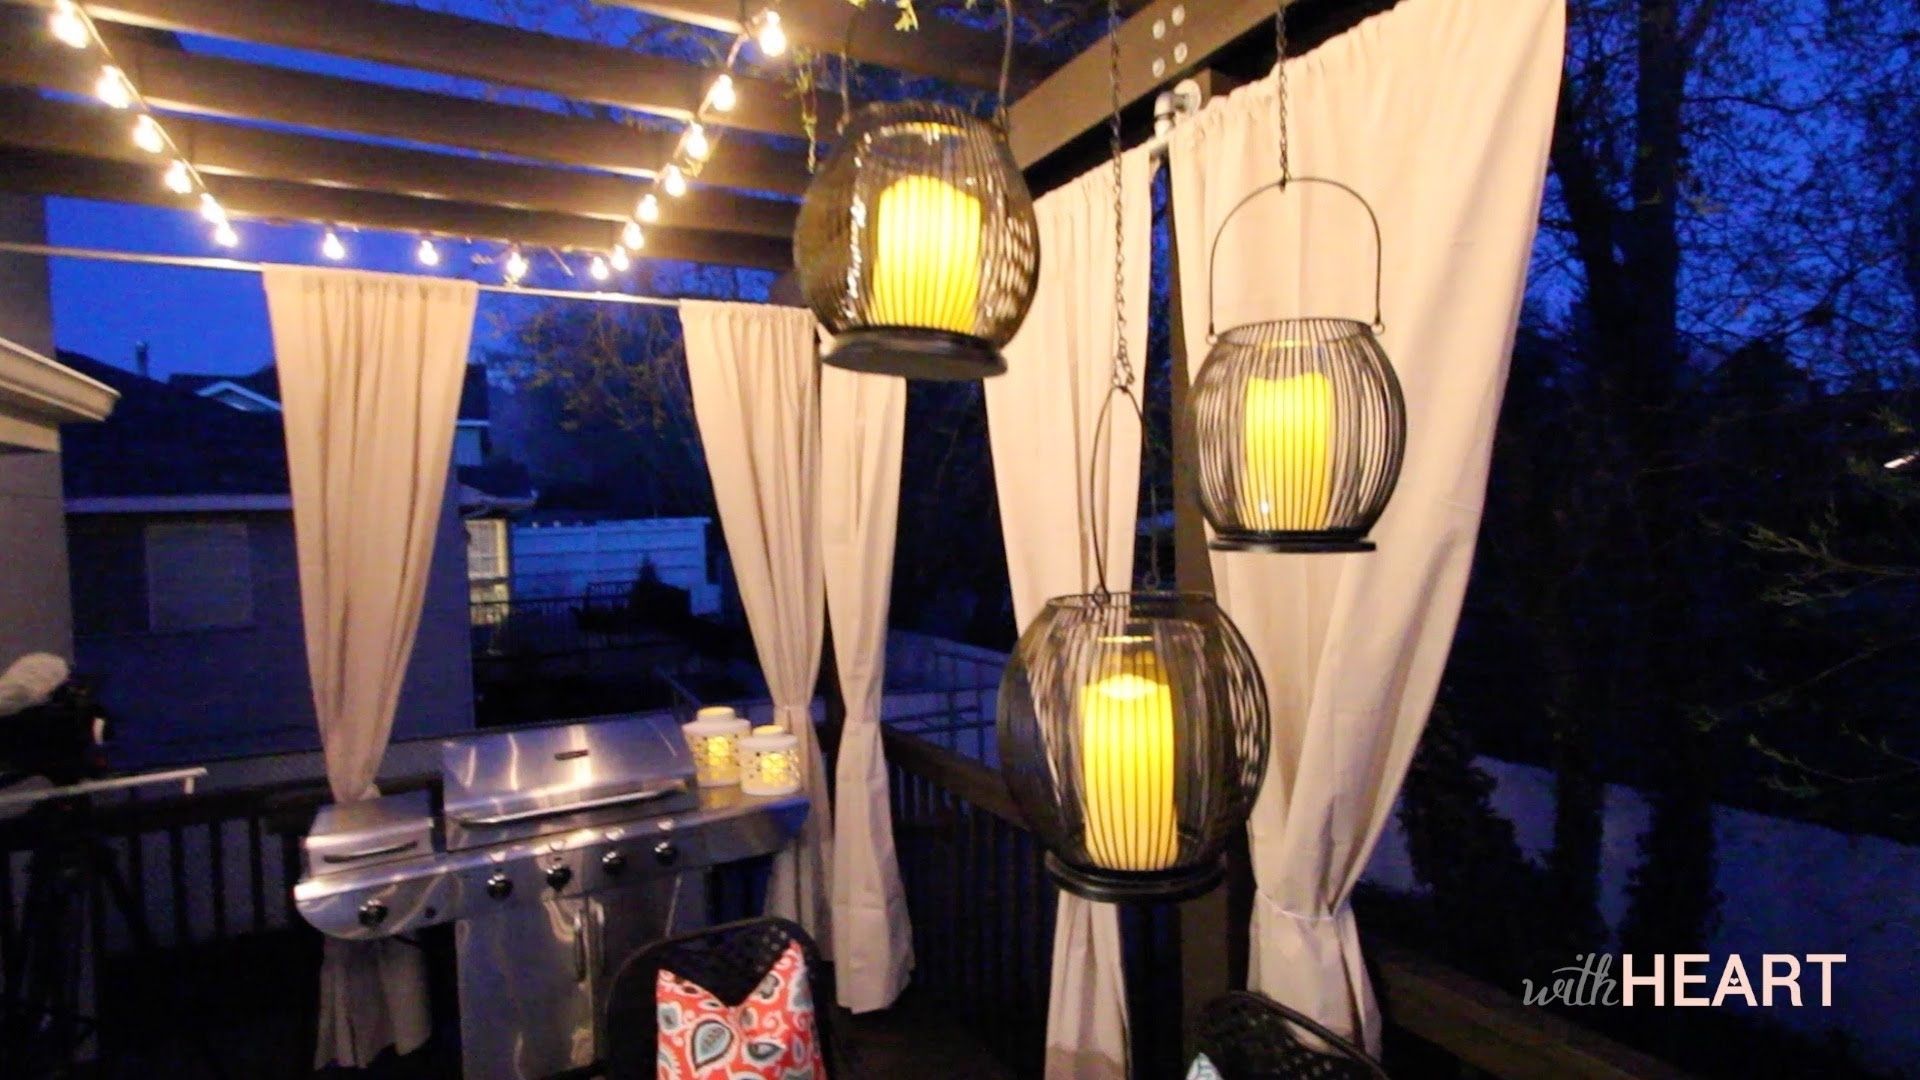 Outdoor String Lights And Hanging Lanterns | Withheart – Youtube Pertaining To Outdoor Chinese Lanterns For Patio (View 17 of 20)